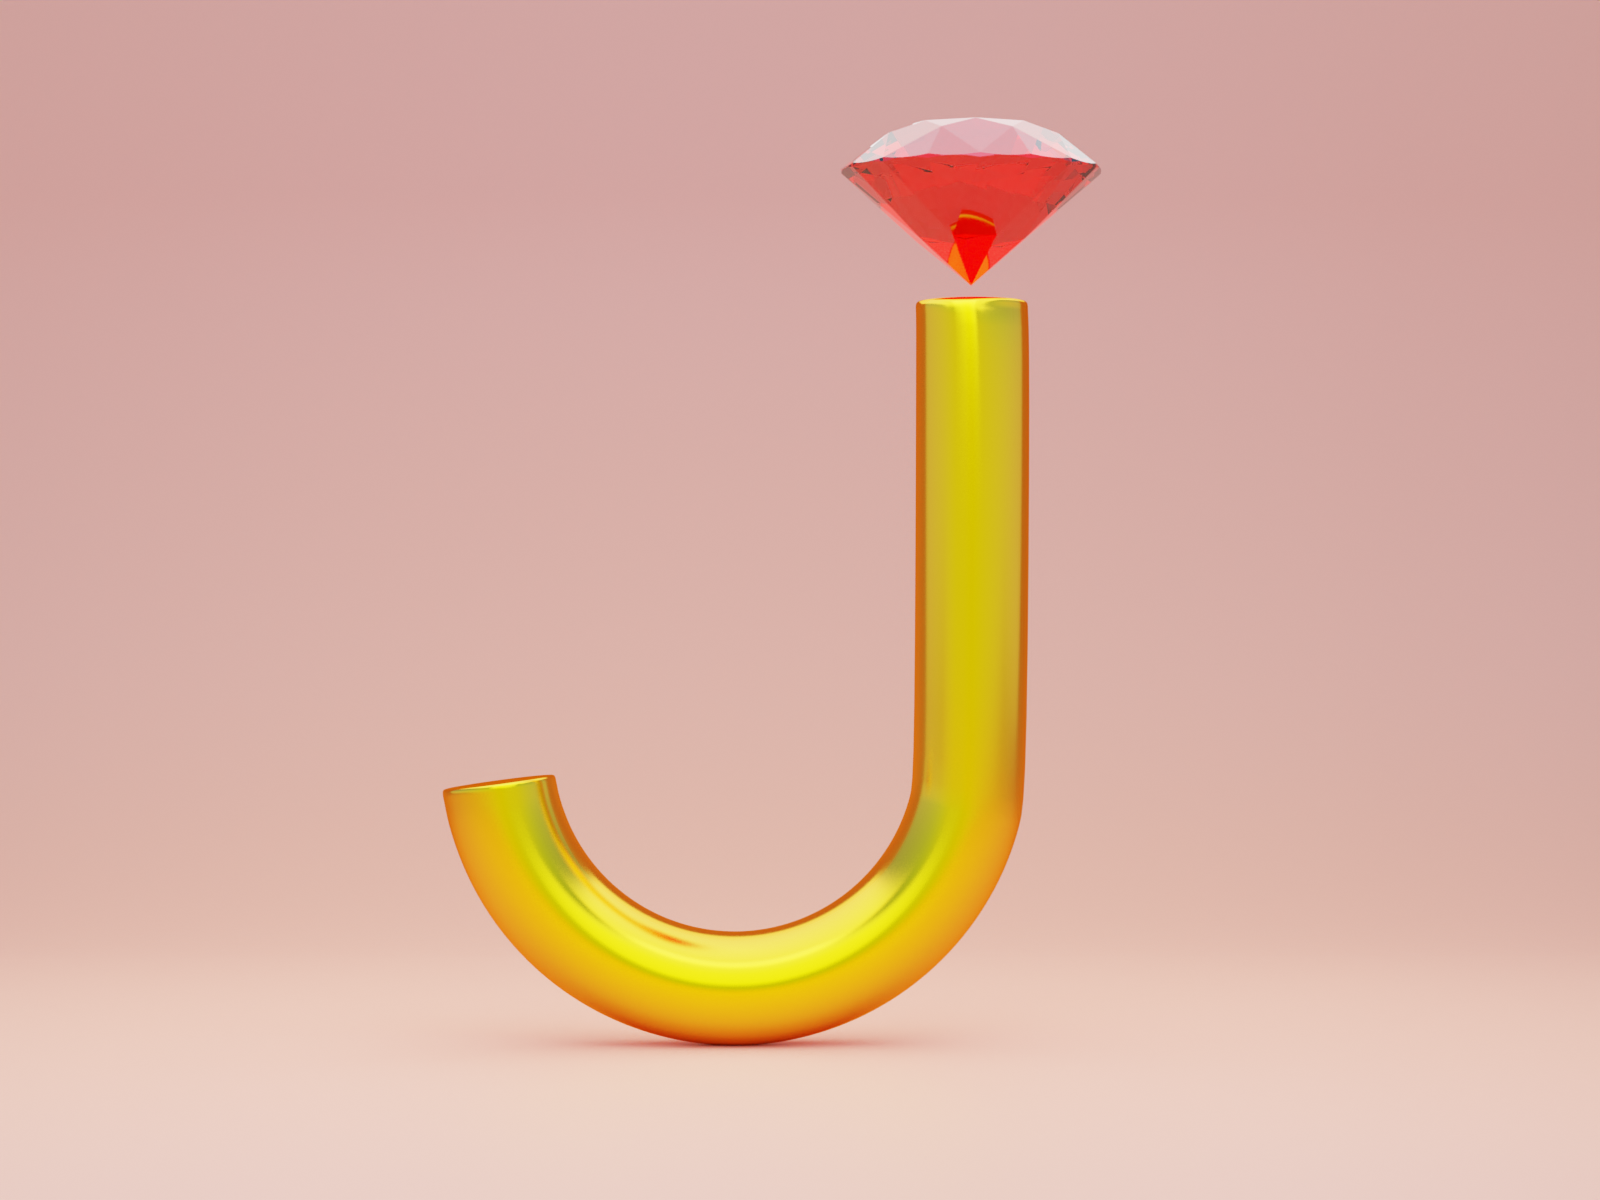 100+] Letter J Wallpapers | Wallpapers.com